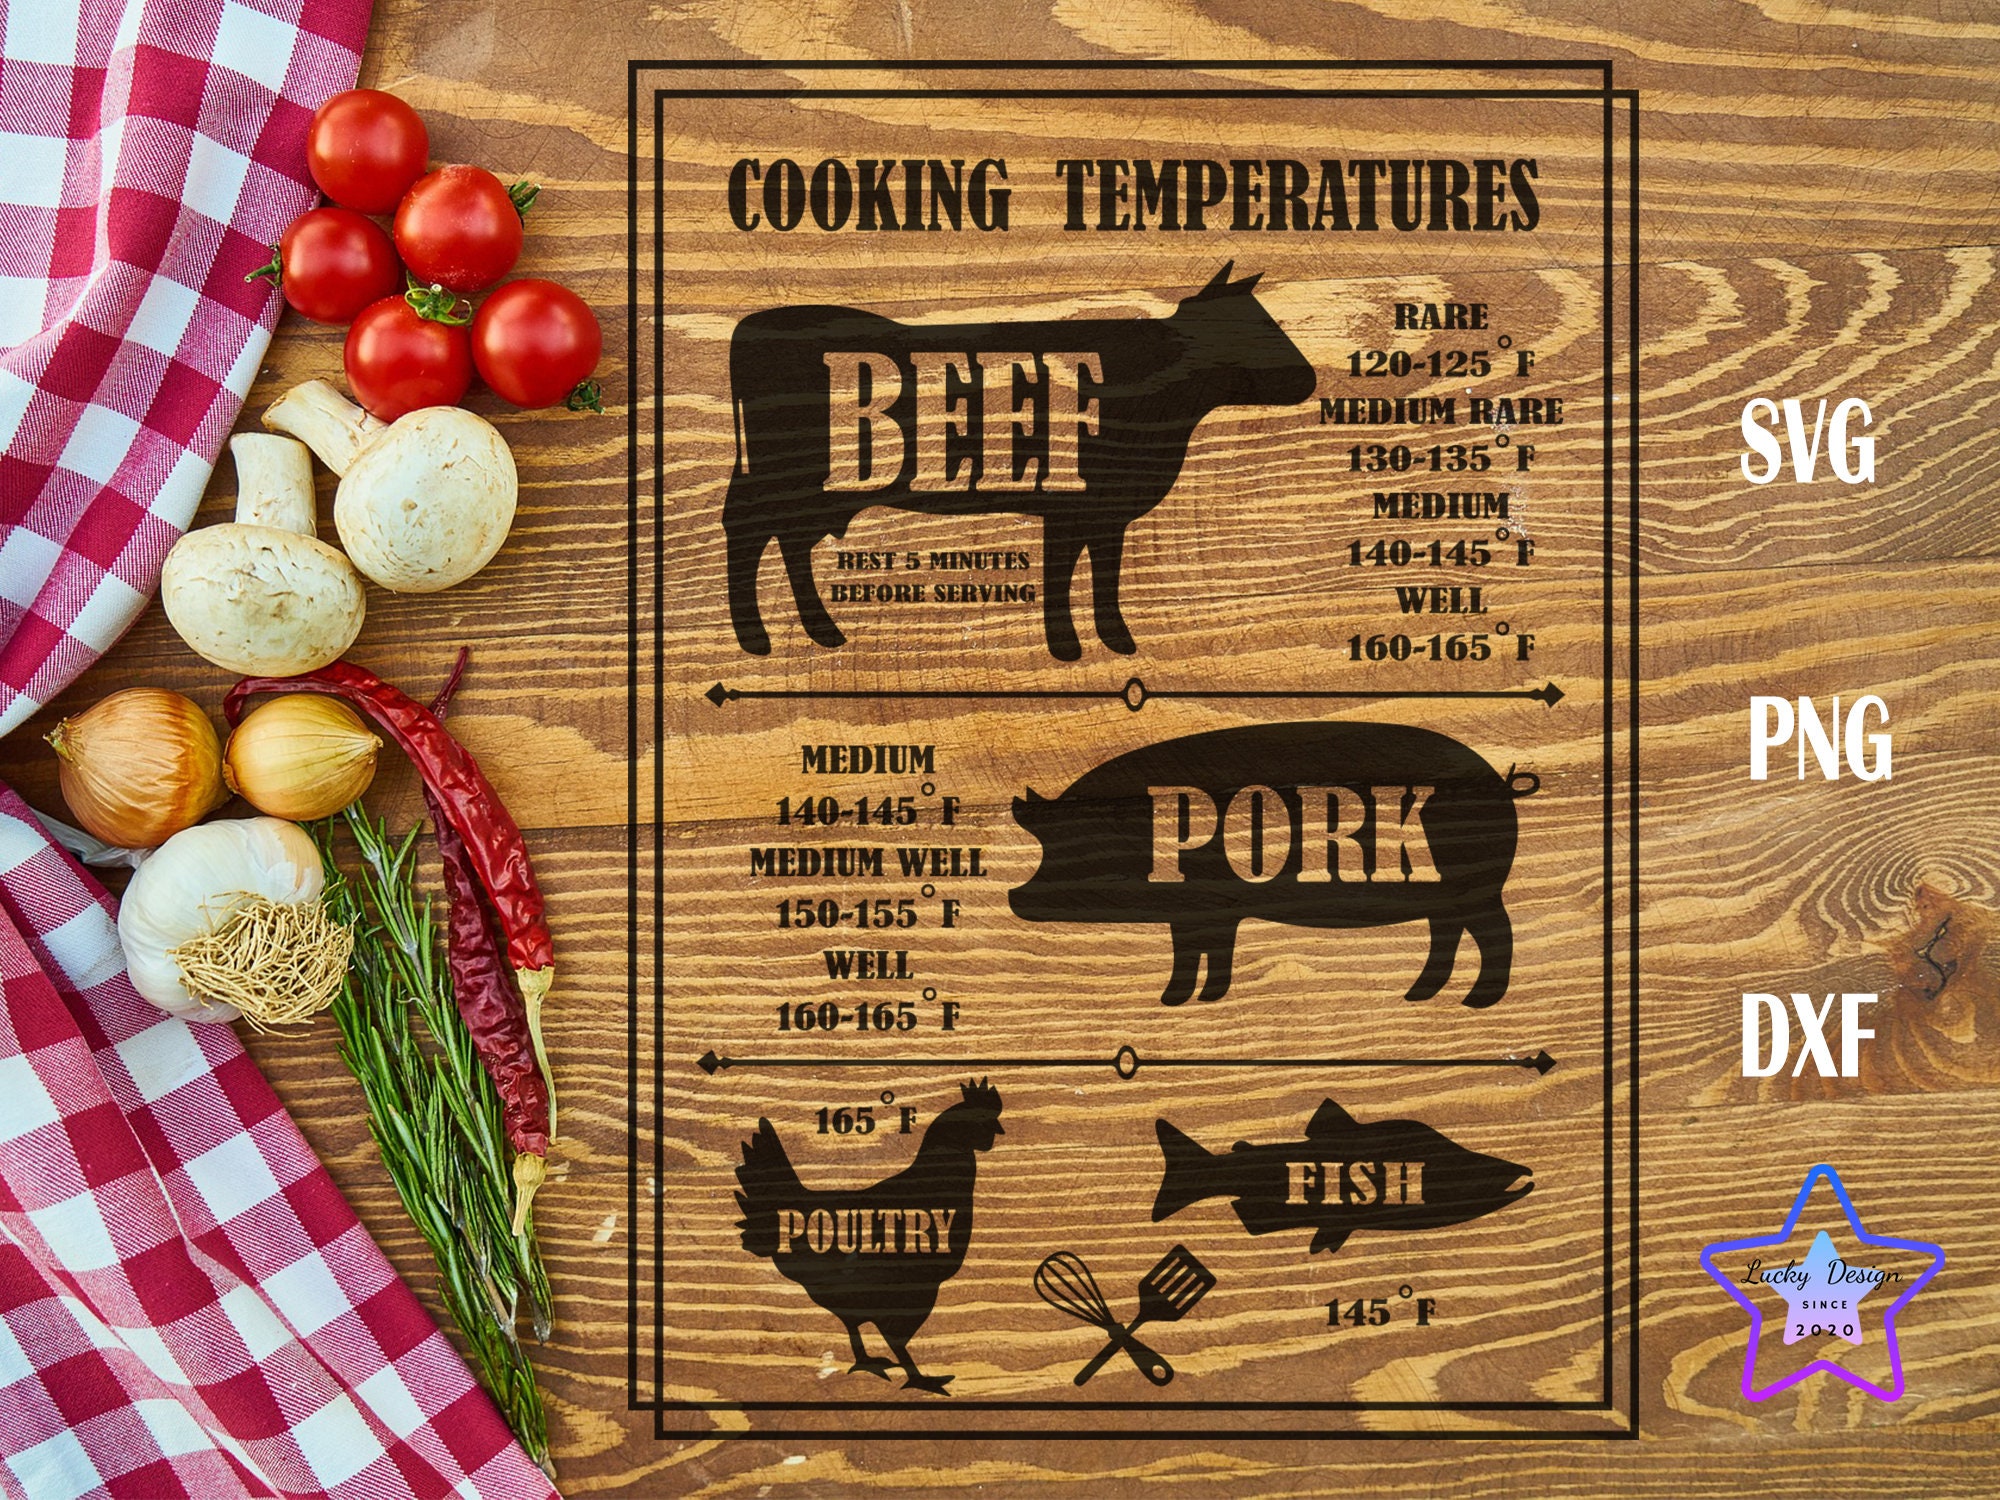 Meat Temperature Chart Metal Tin Signs Cooking Grill Knowledge Posters  Restaurant Kitchen Wall Art Decor Cook Farmhouse Guide Plaque 12x16 Inches